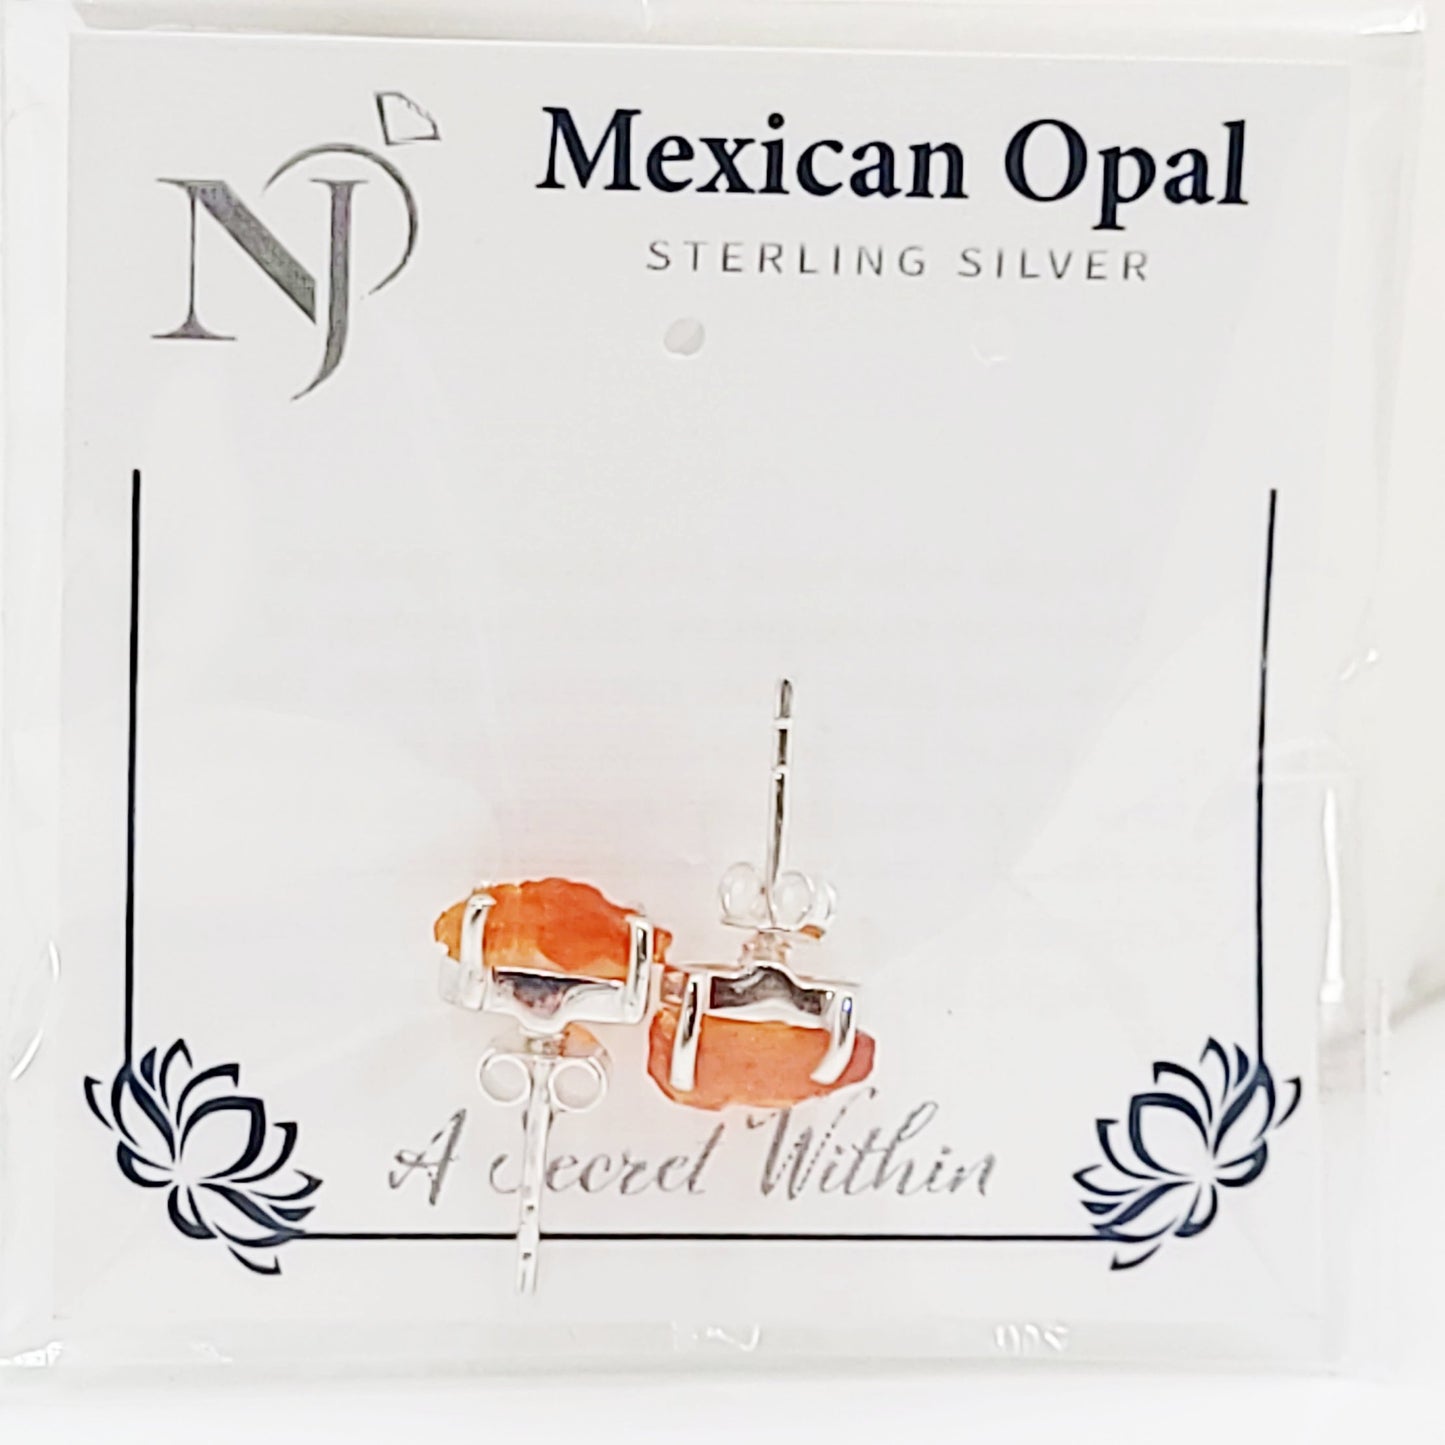 Mexican Opal Earrings Rough Sterling Silver Stud - Elevated Metaphysical